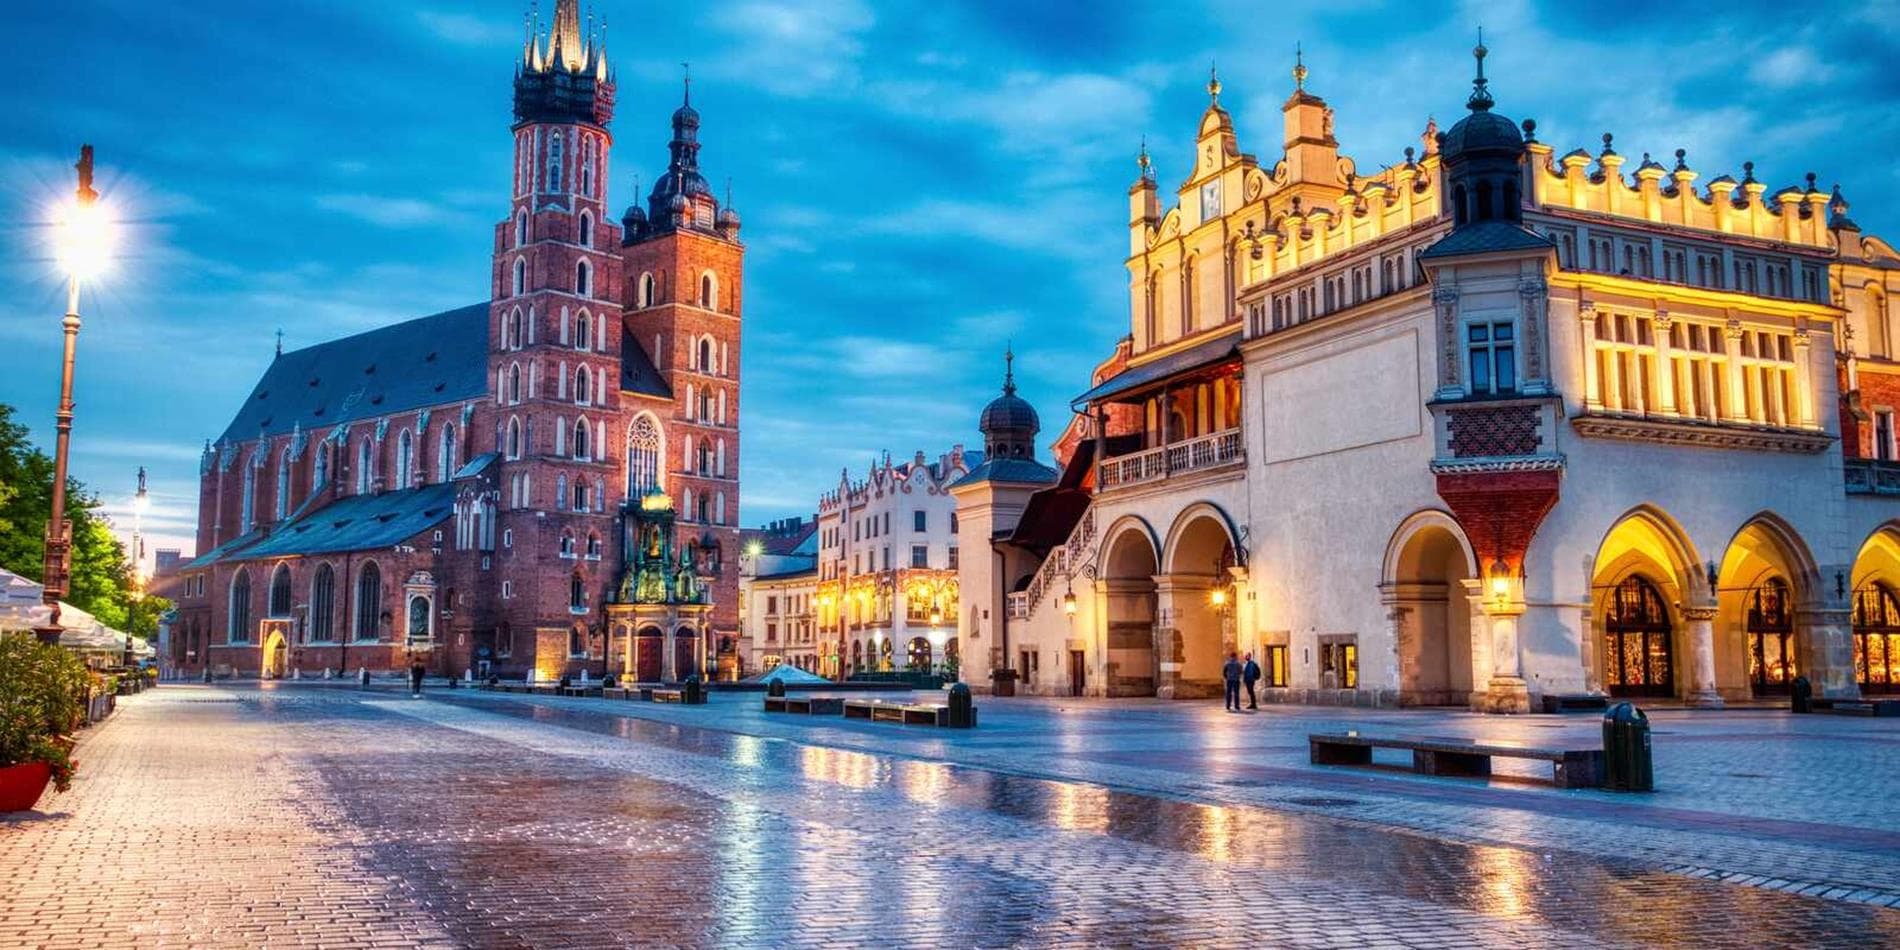 Town square at night in Krakow, Poland